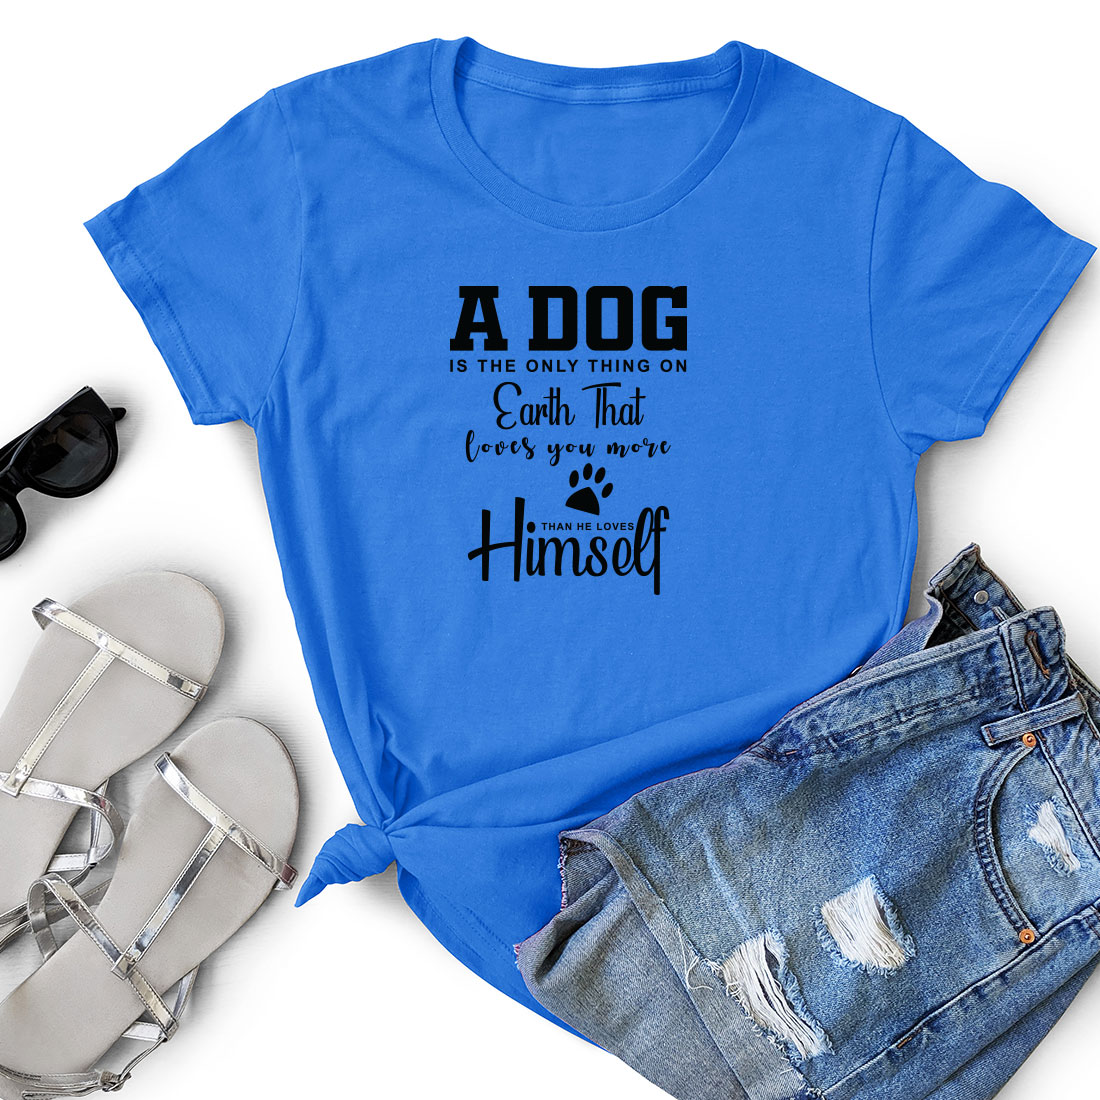 T - shirt that says a dog is not a human.